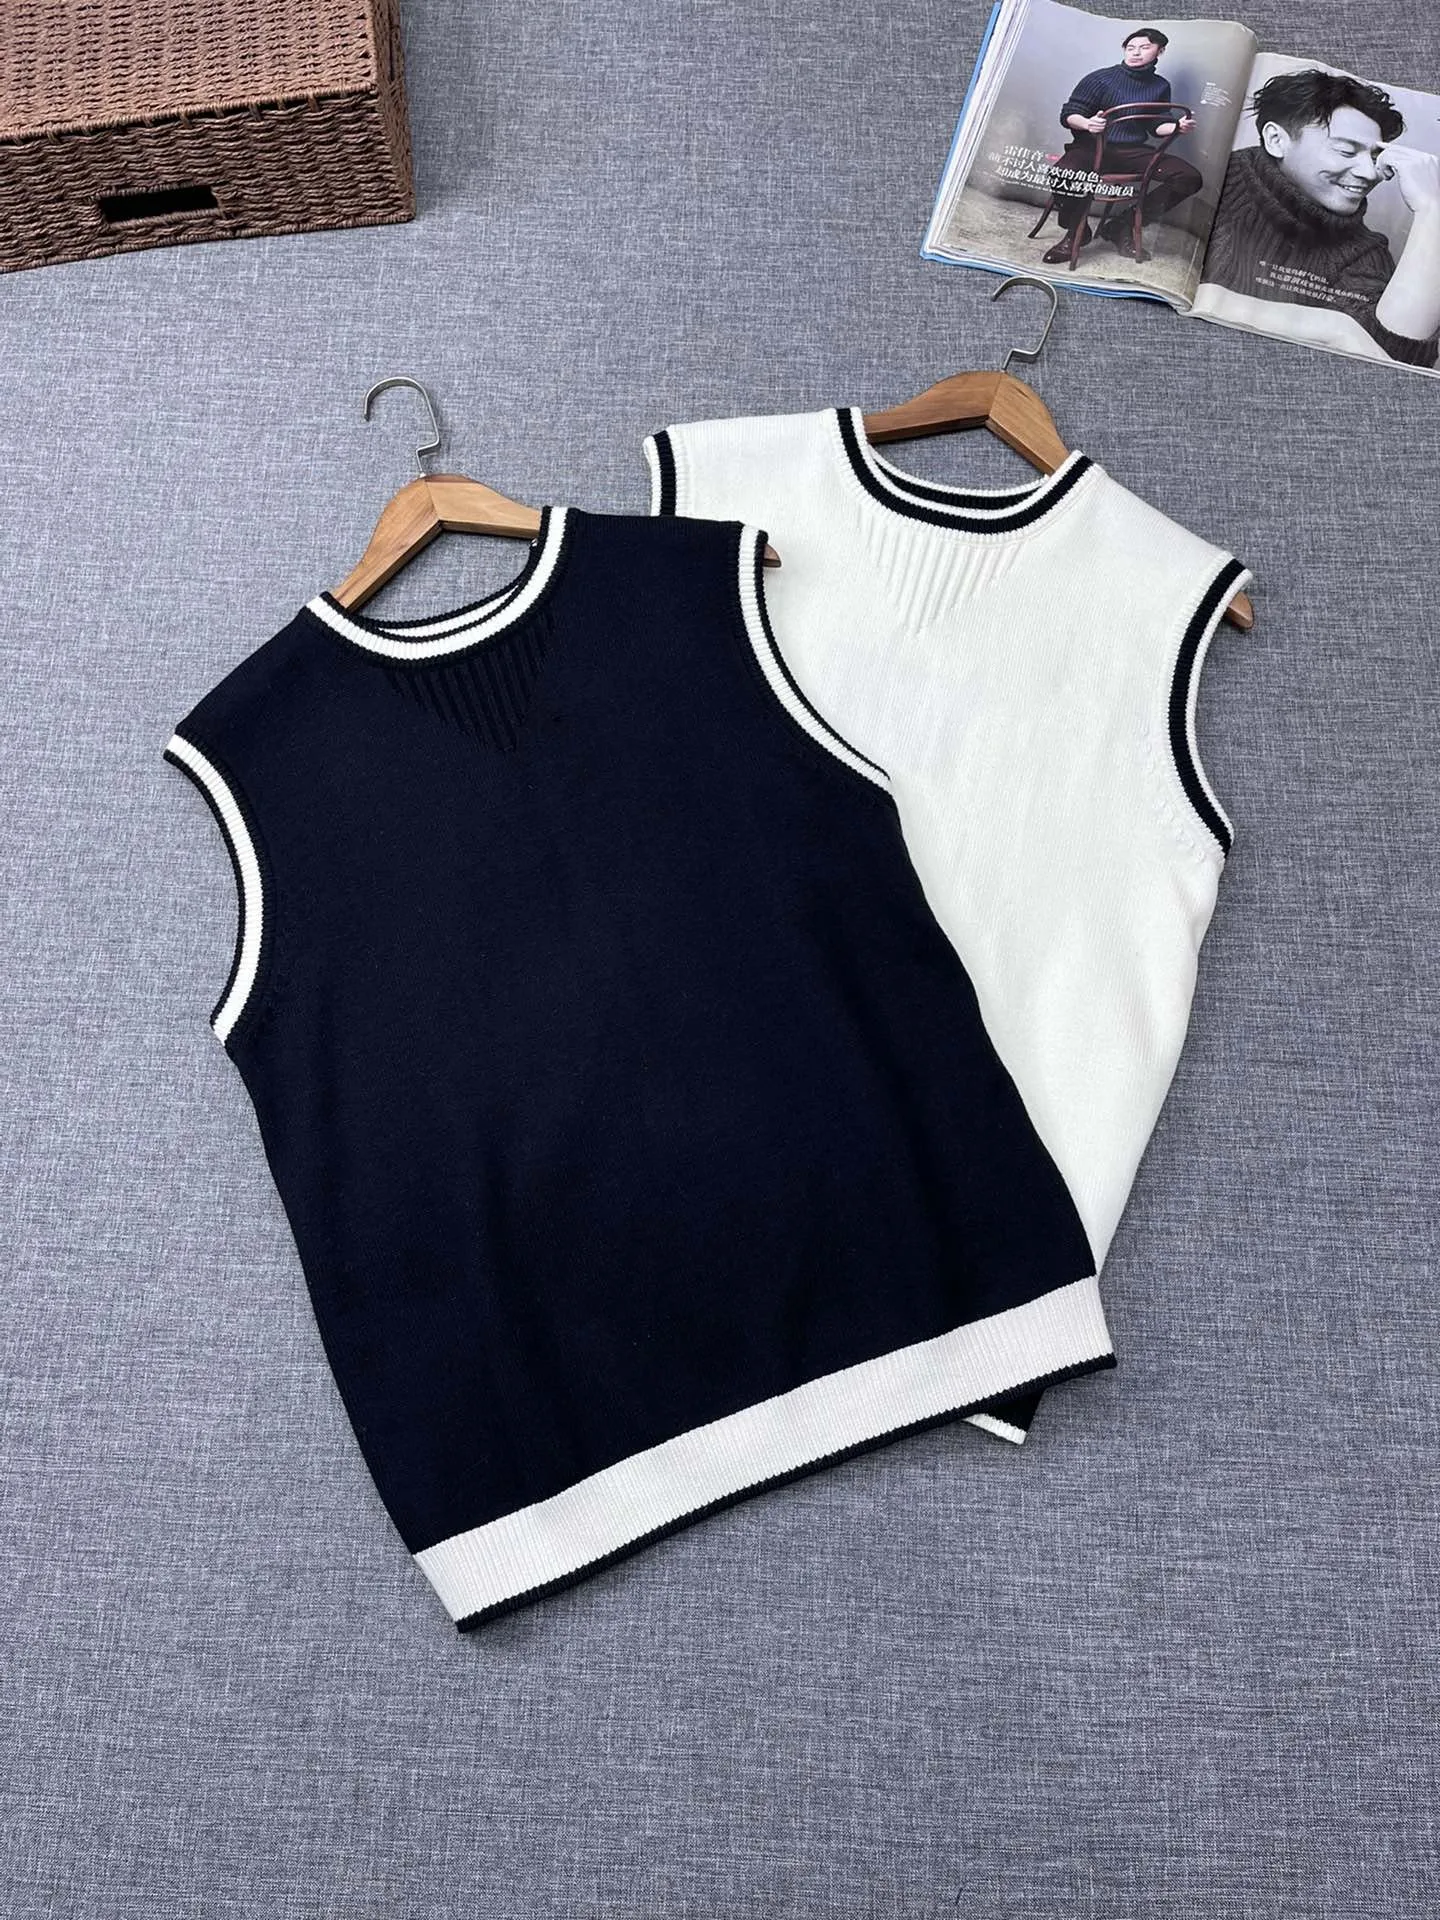 New Sweater Vest Famous Brand Solid Design Knitted Vest Sweater High Quality Sleeveless Thick Casual Sweater Female Waistcoat